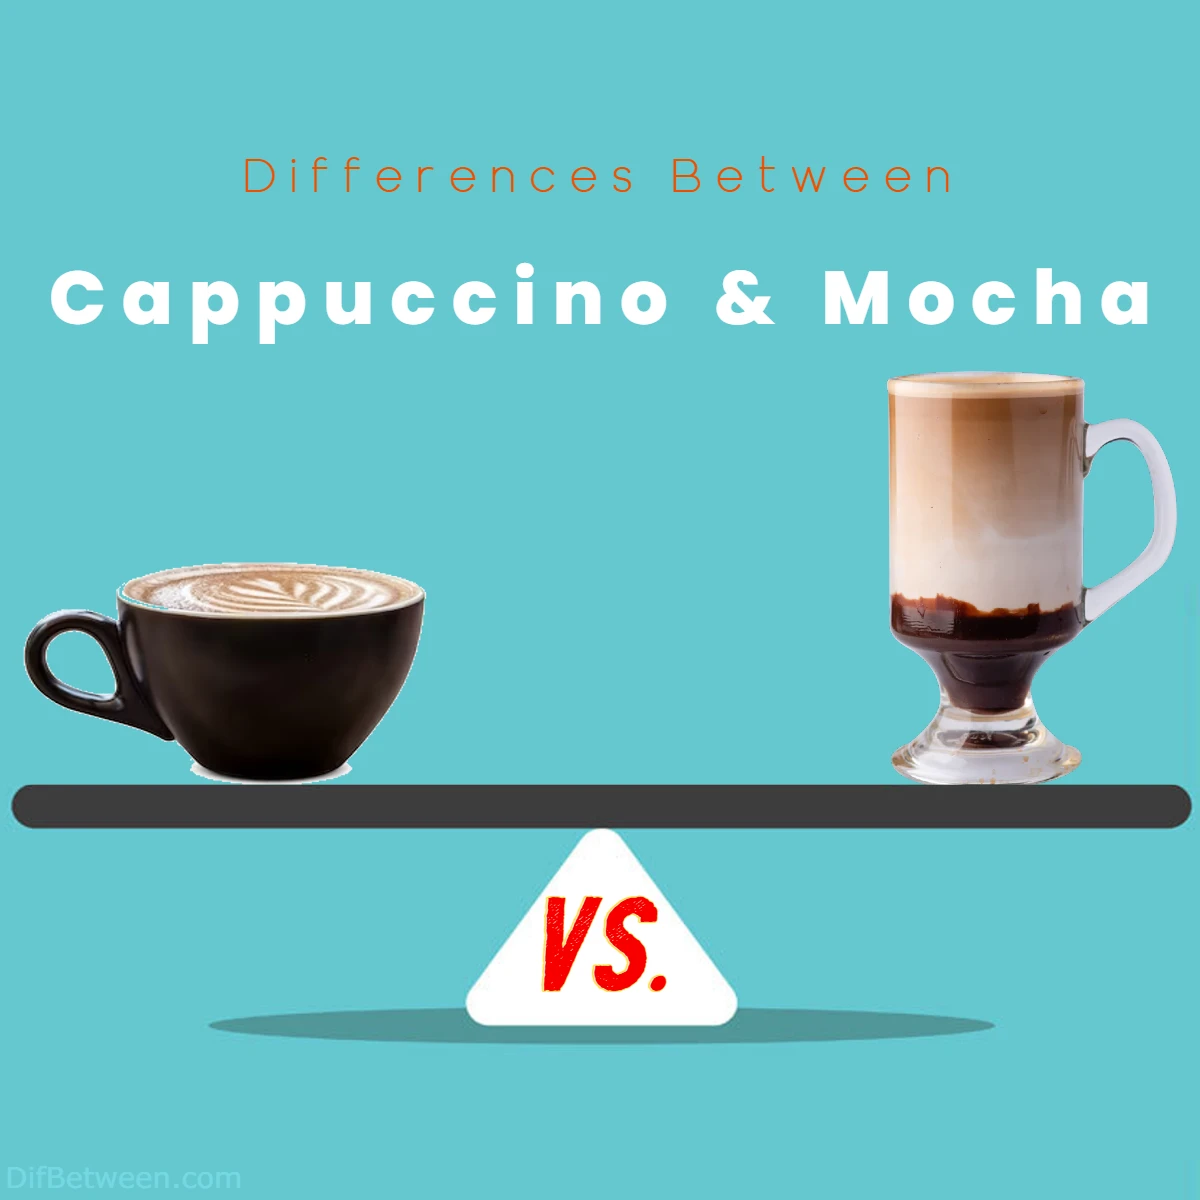 Differences Between Mochas and Cappuccinos